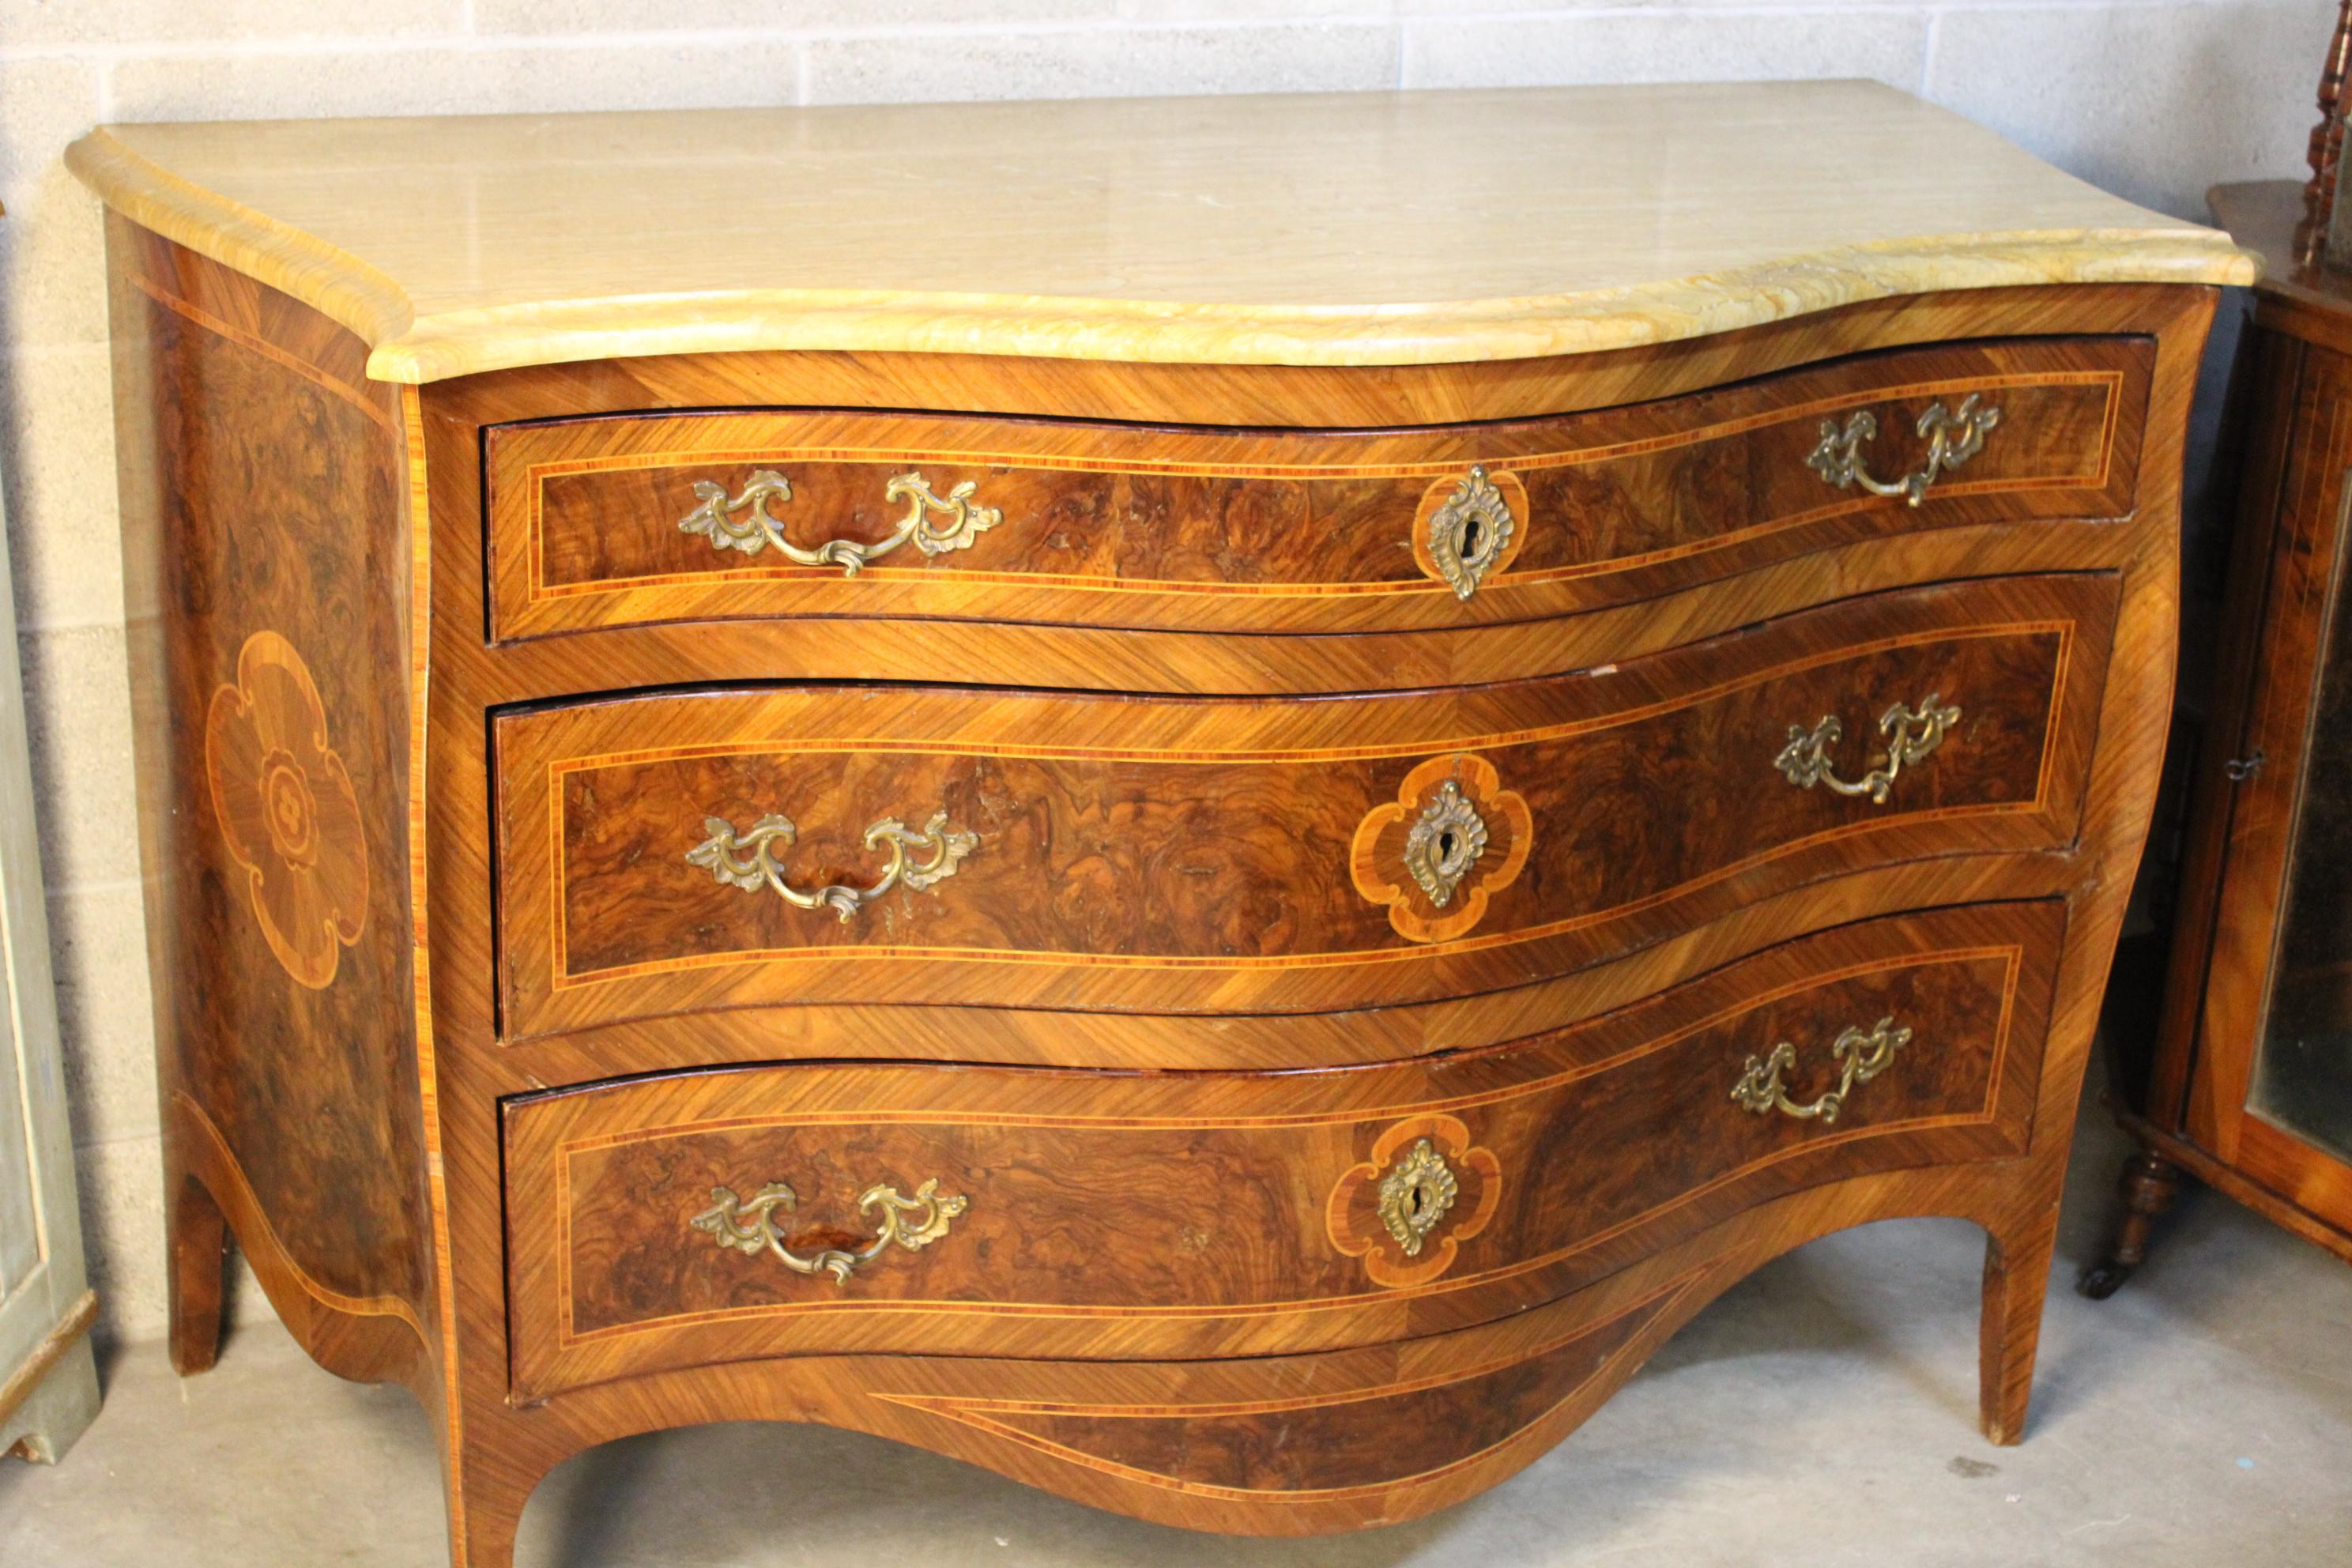 Neapolitan commode, circa 1775
Comes with old certification of authenticity
Marquetry in various woods and below marble top, the latter thick and heavy (3 cm thickness)
In good condition with minor old restorations.
The commode will be shipped